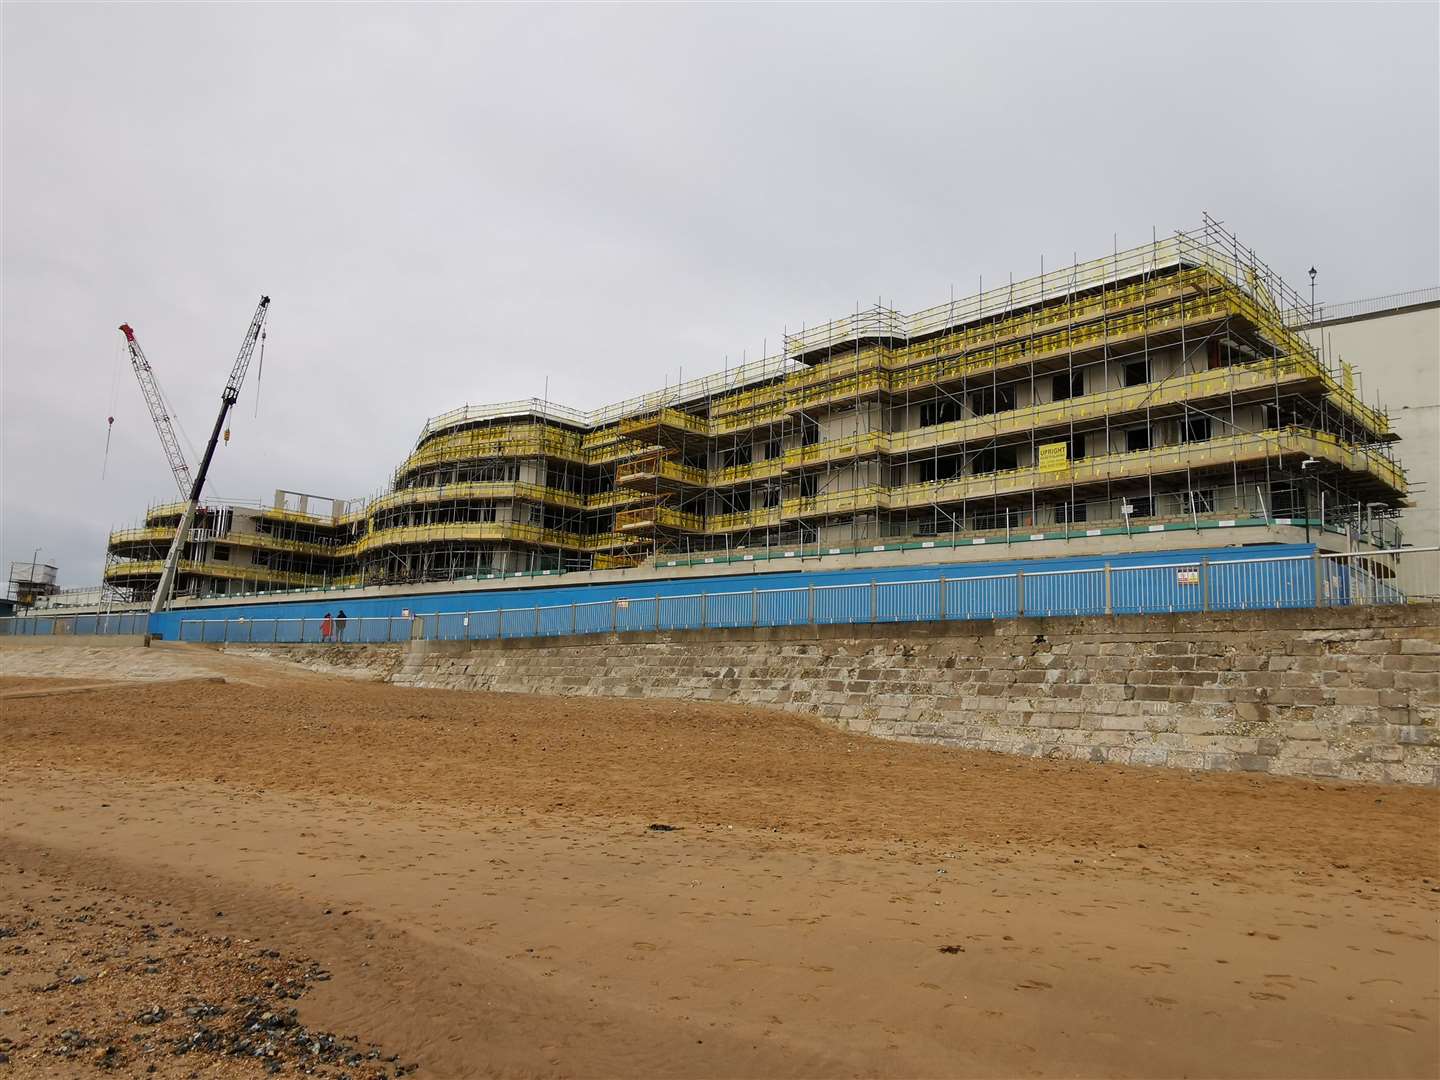 Work is "progressing nicely" at Royal Sands